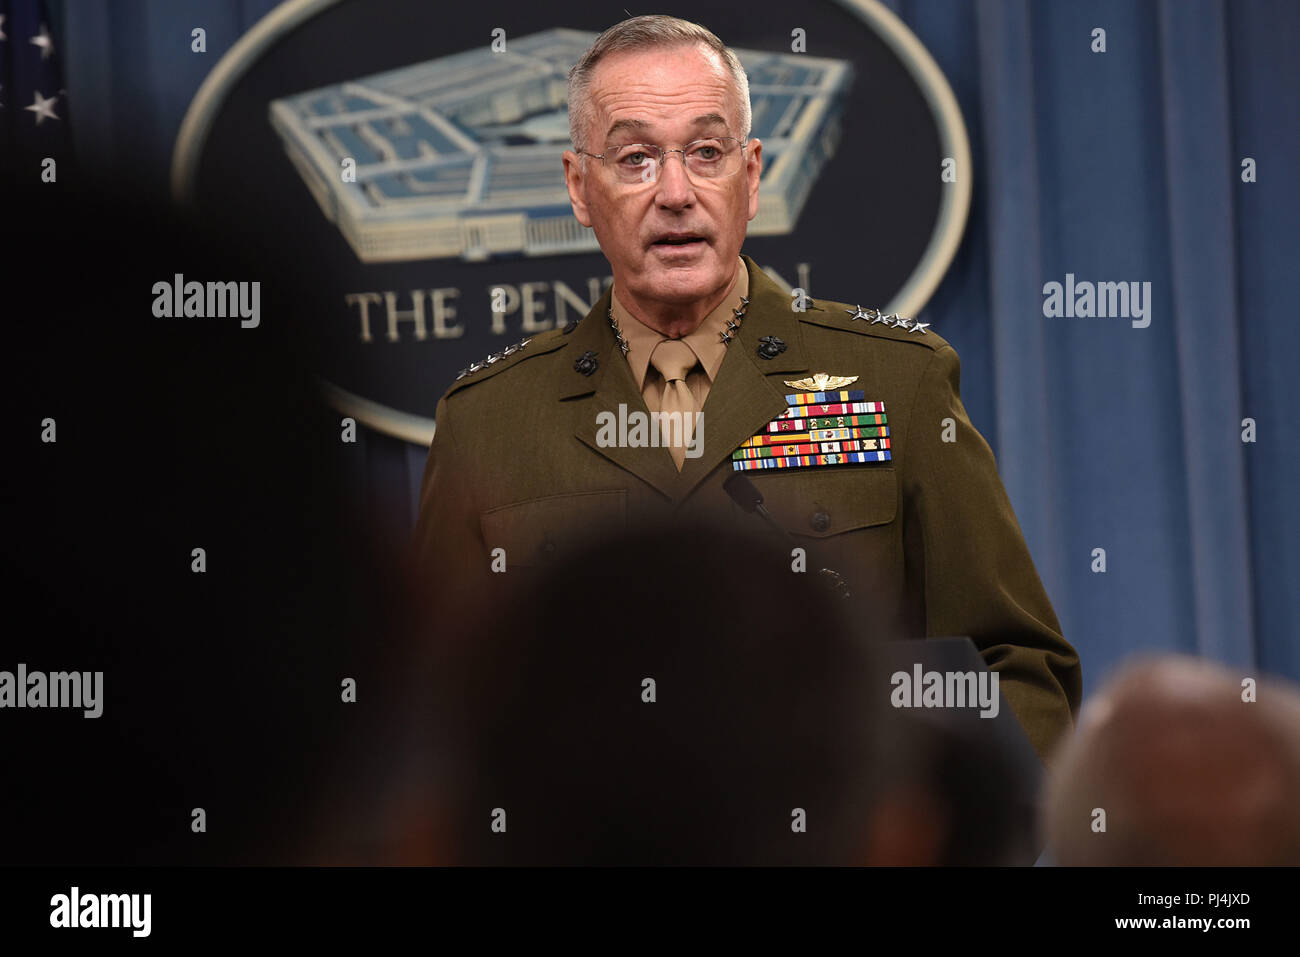 The chairman of the Joint Chiefs of Staff, Marine Corps Gen. Joseph F. Dunford, speaks at a joint press conference with U.S. Secretary of Defense James N. Mattis, at the Pentagon, Arlington, Va., Aug. 28, 2018. DoD photo by Lisa Ferdinando Stock Photo